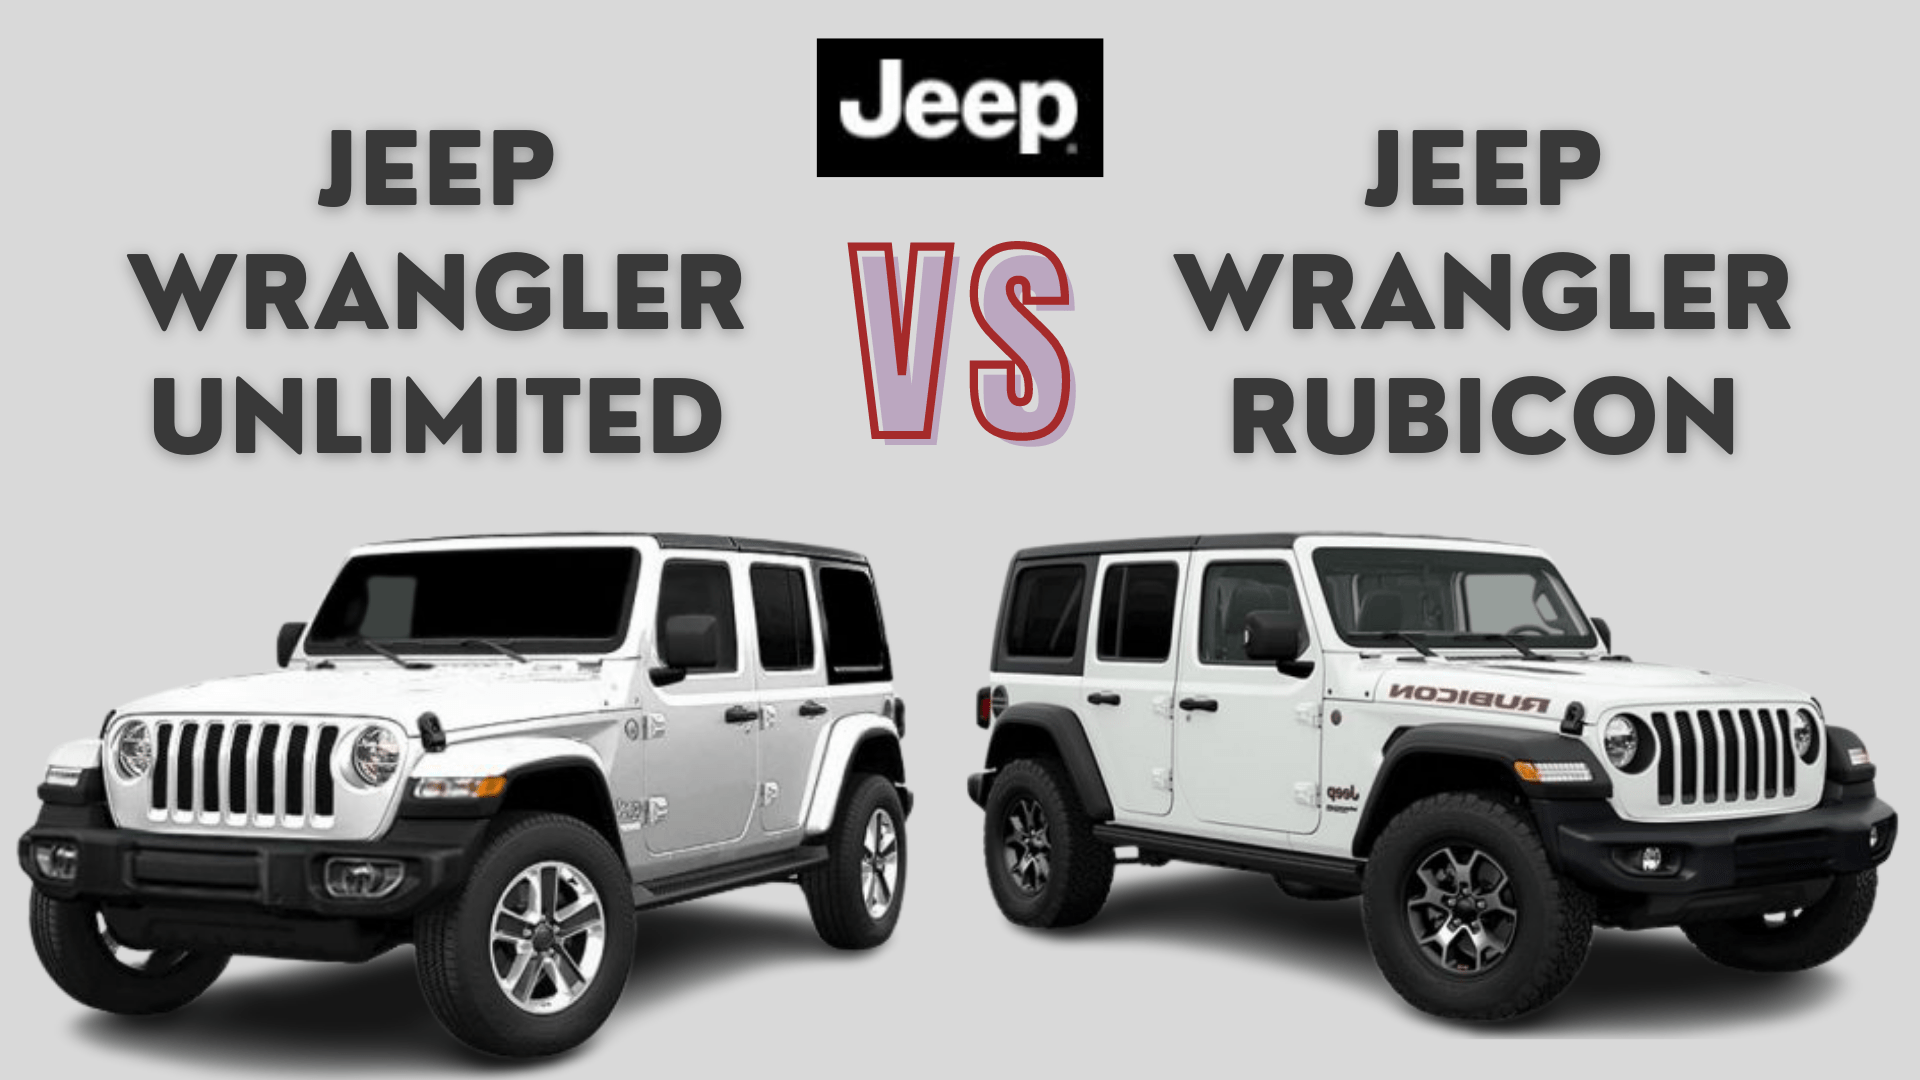 Arriba 66+ imagen whats the difference between wrangler and rubicon